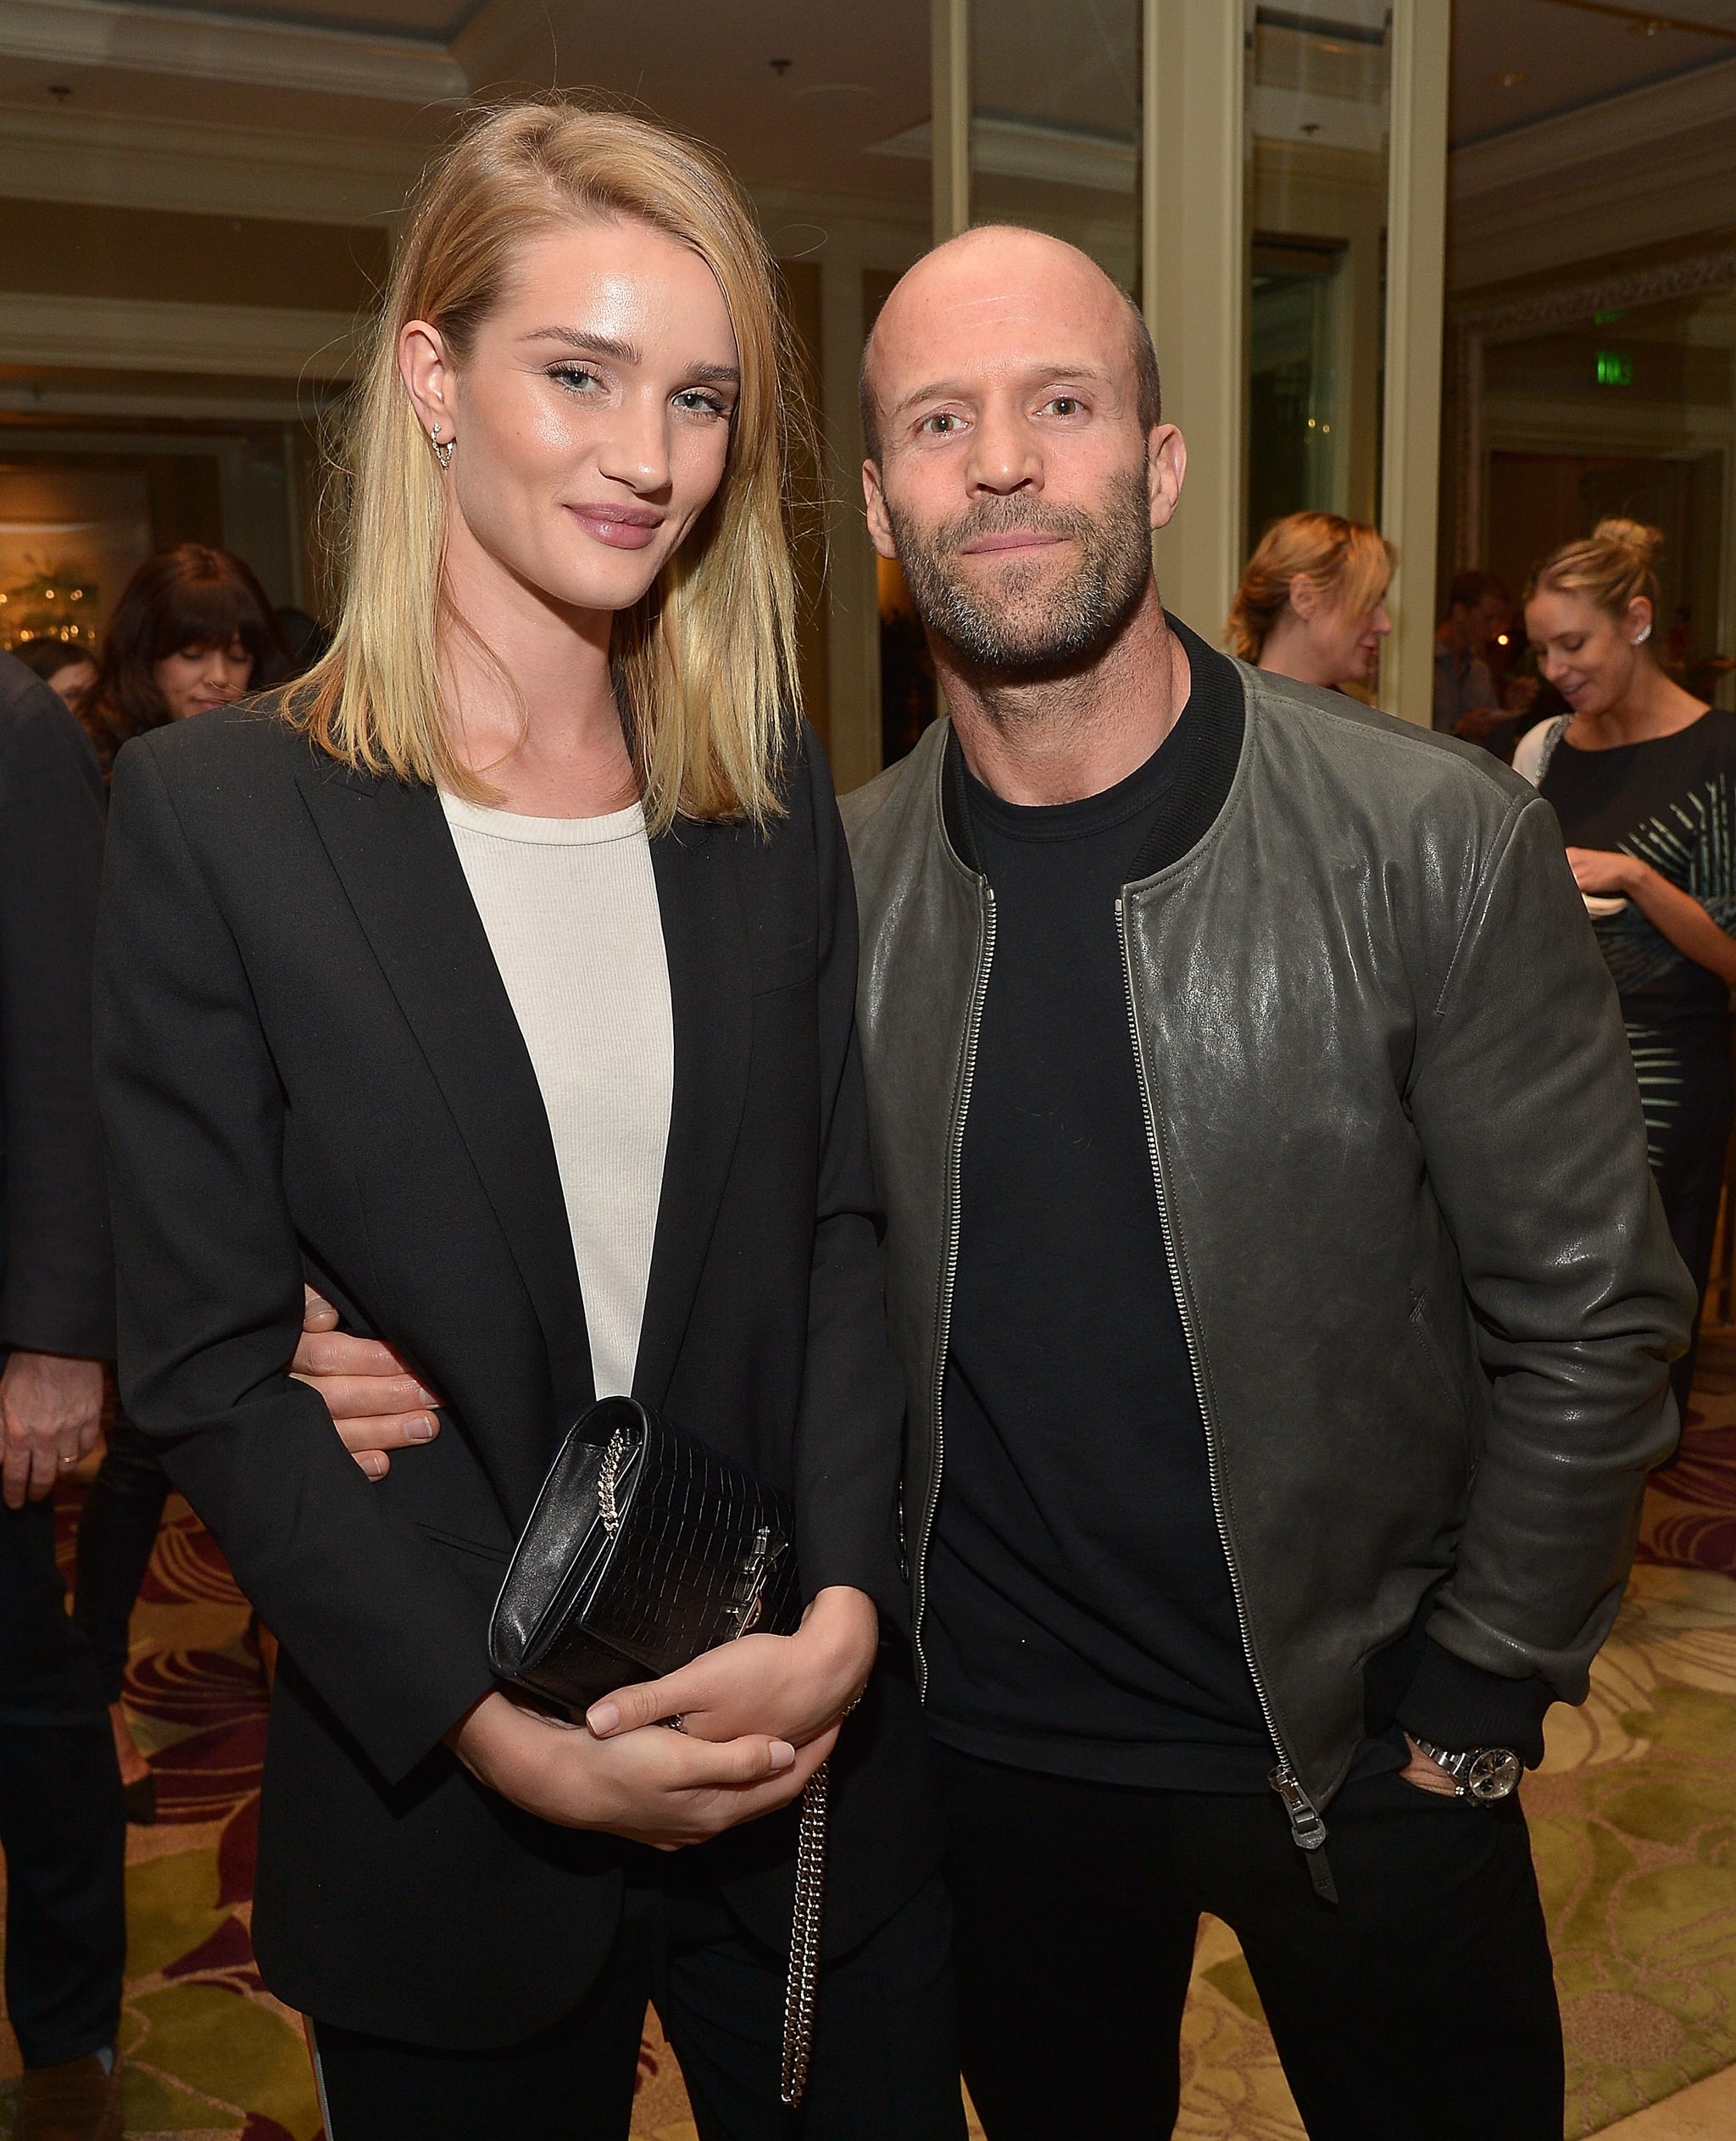 Actor Jason Statham attends the 2015 CinemaCon in Las Vegas | Jason statham,  Statham, Jason statham body